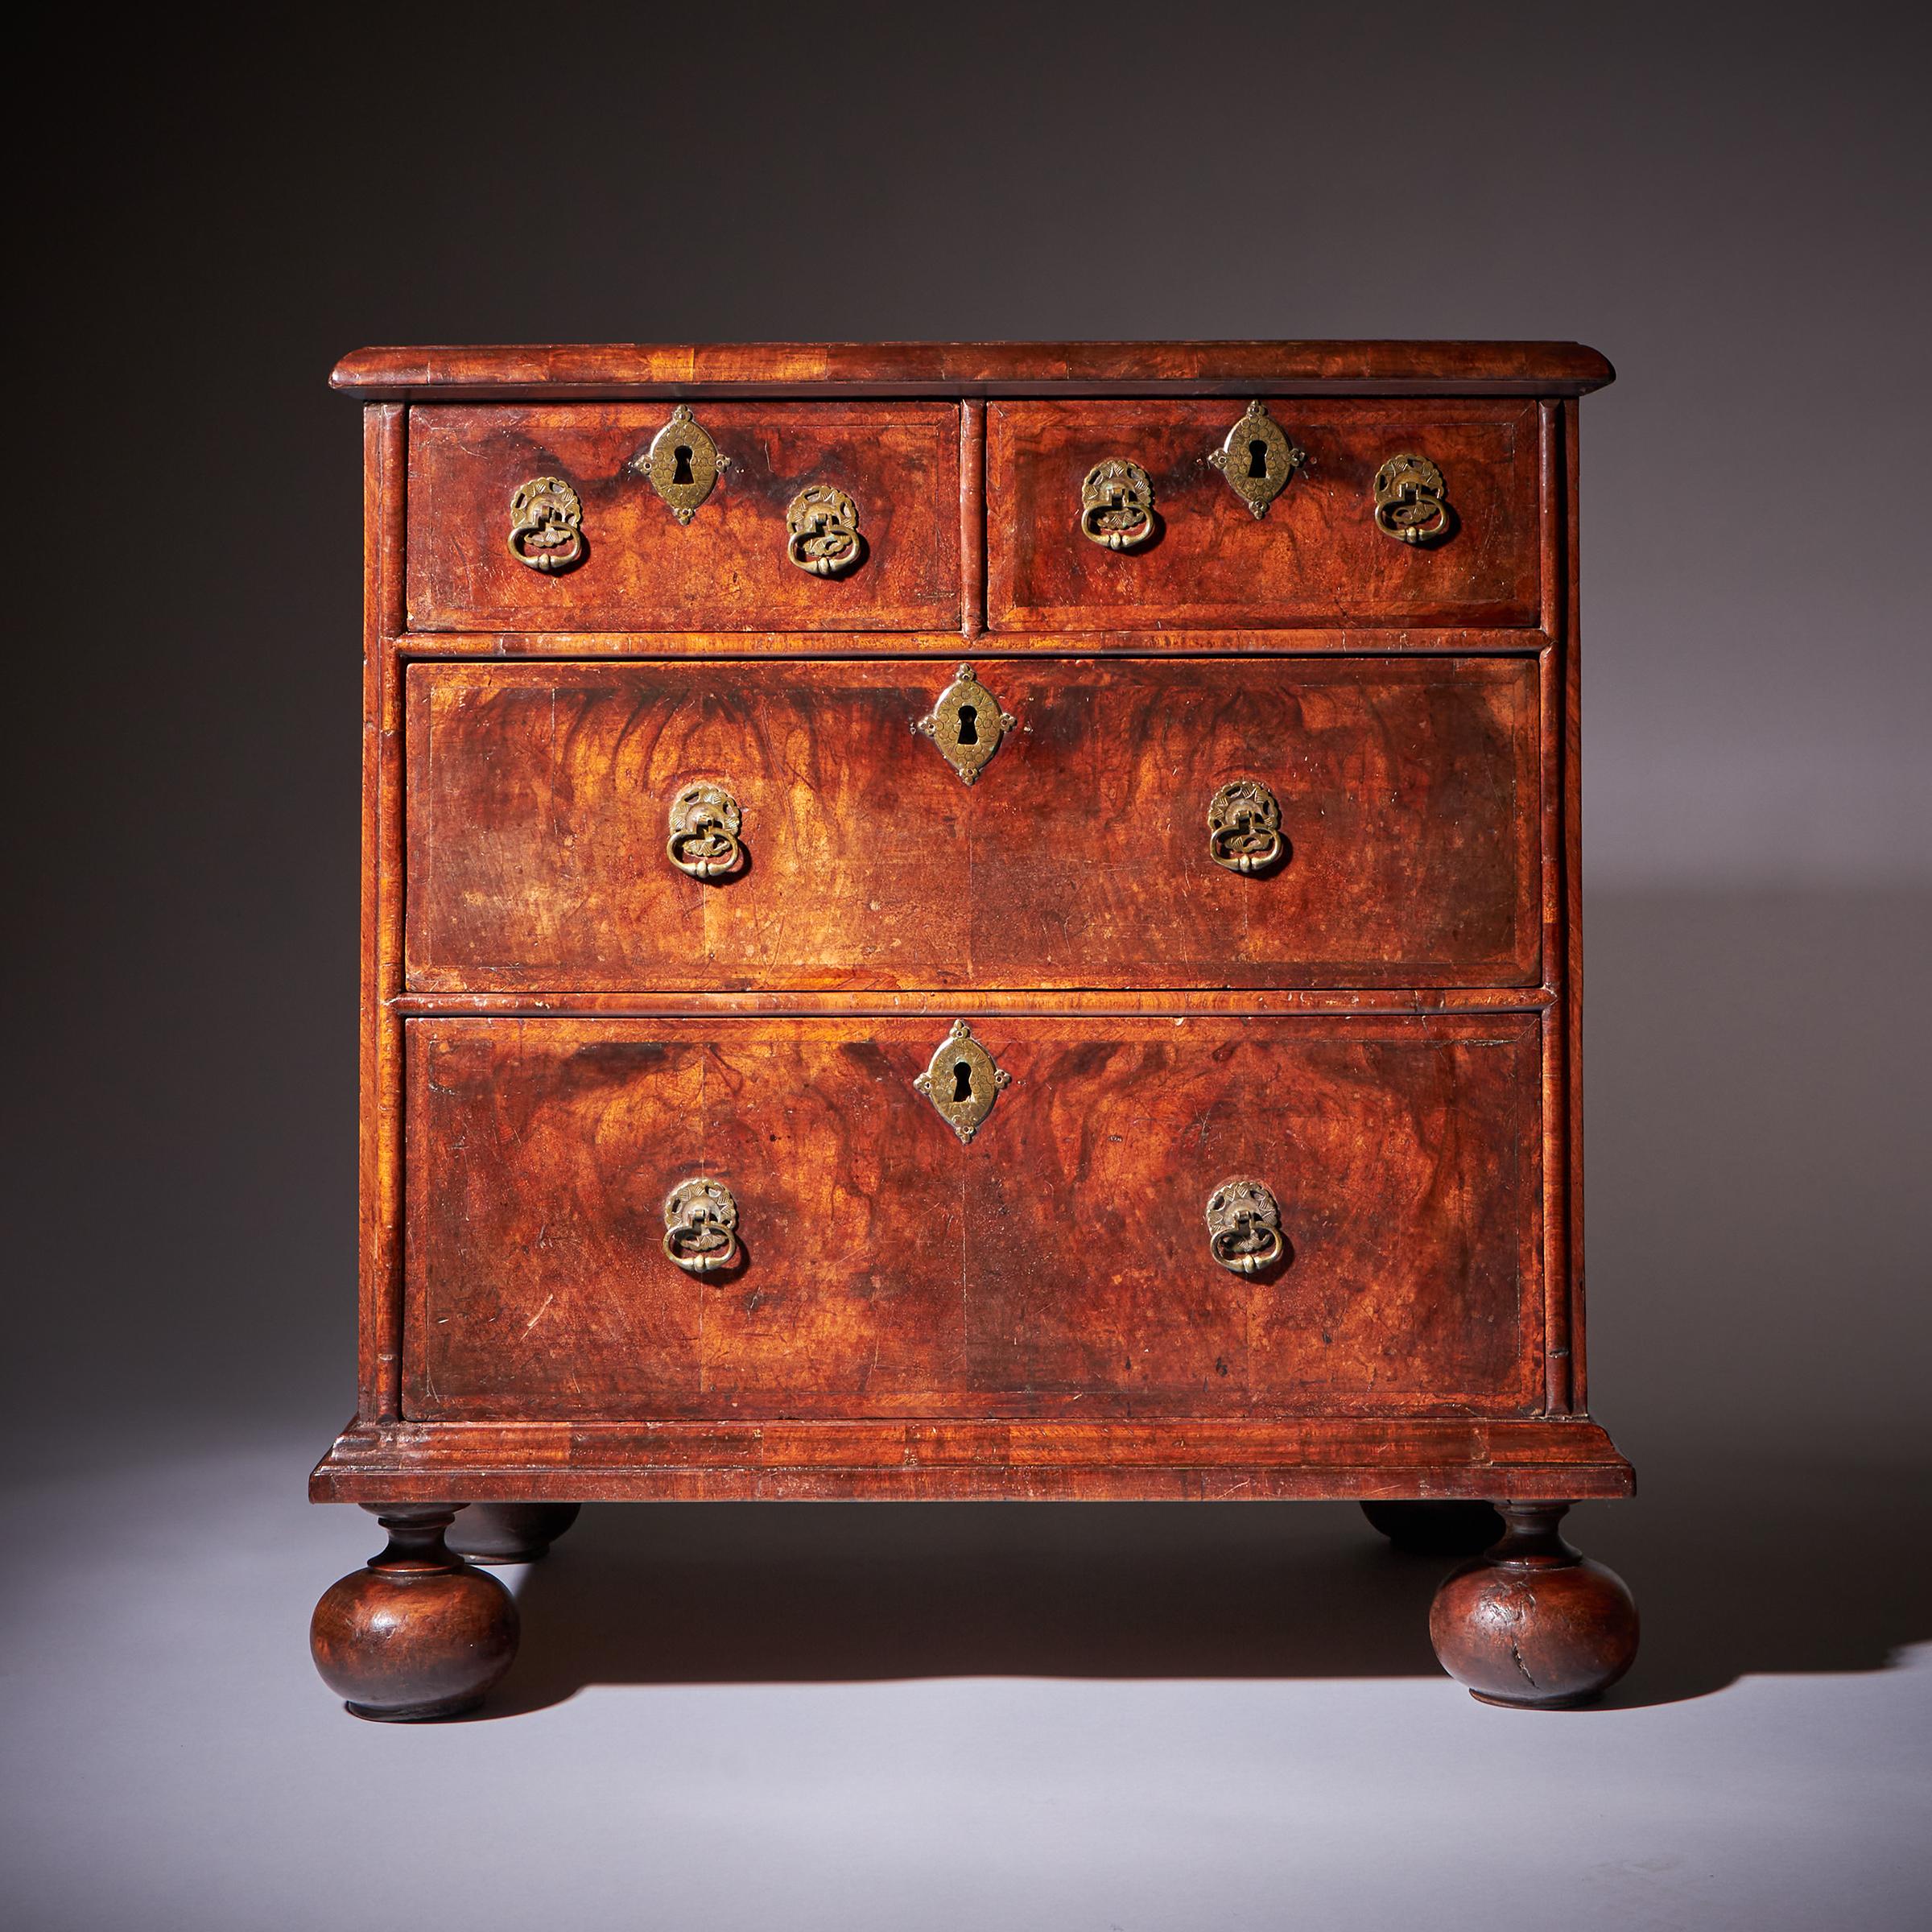 A Small and Rare William and Marry Figured Walnut Chest of Drawers Circa 1690-2